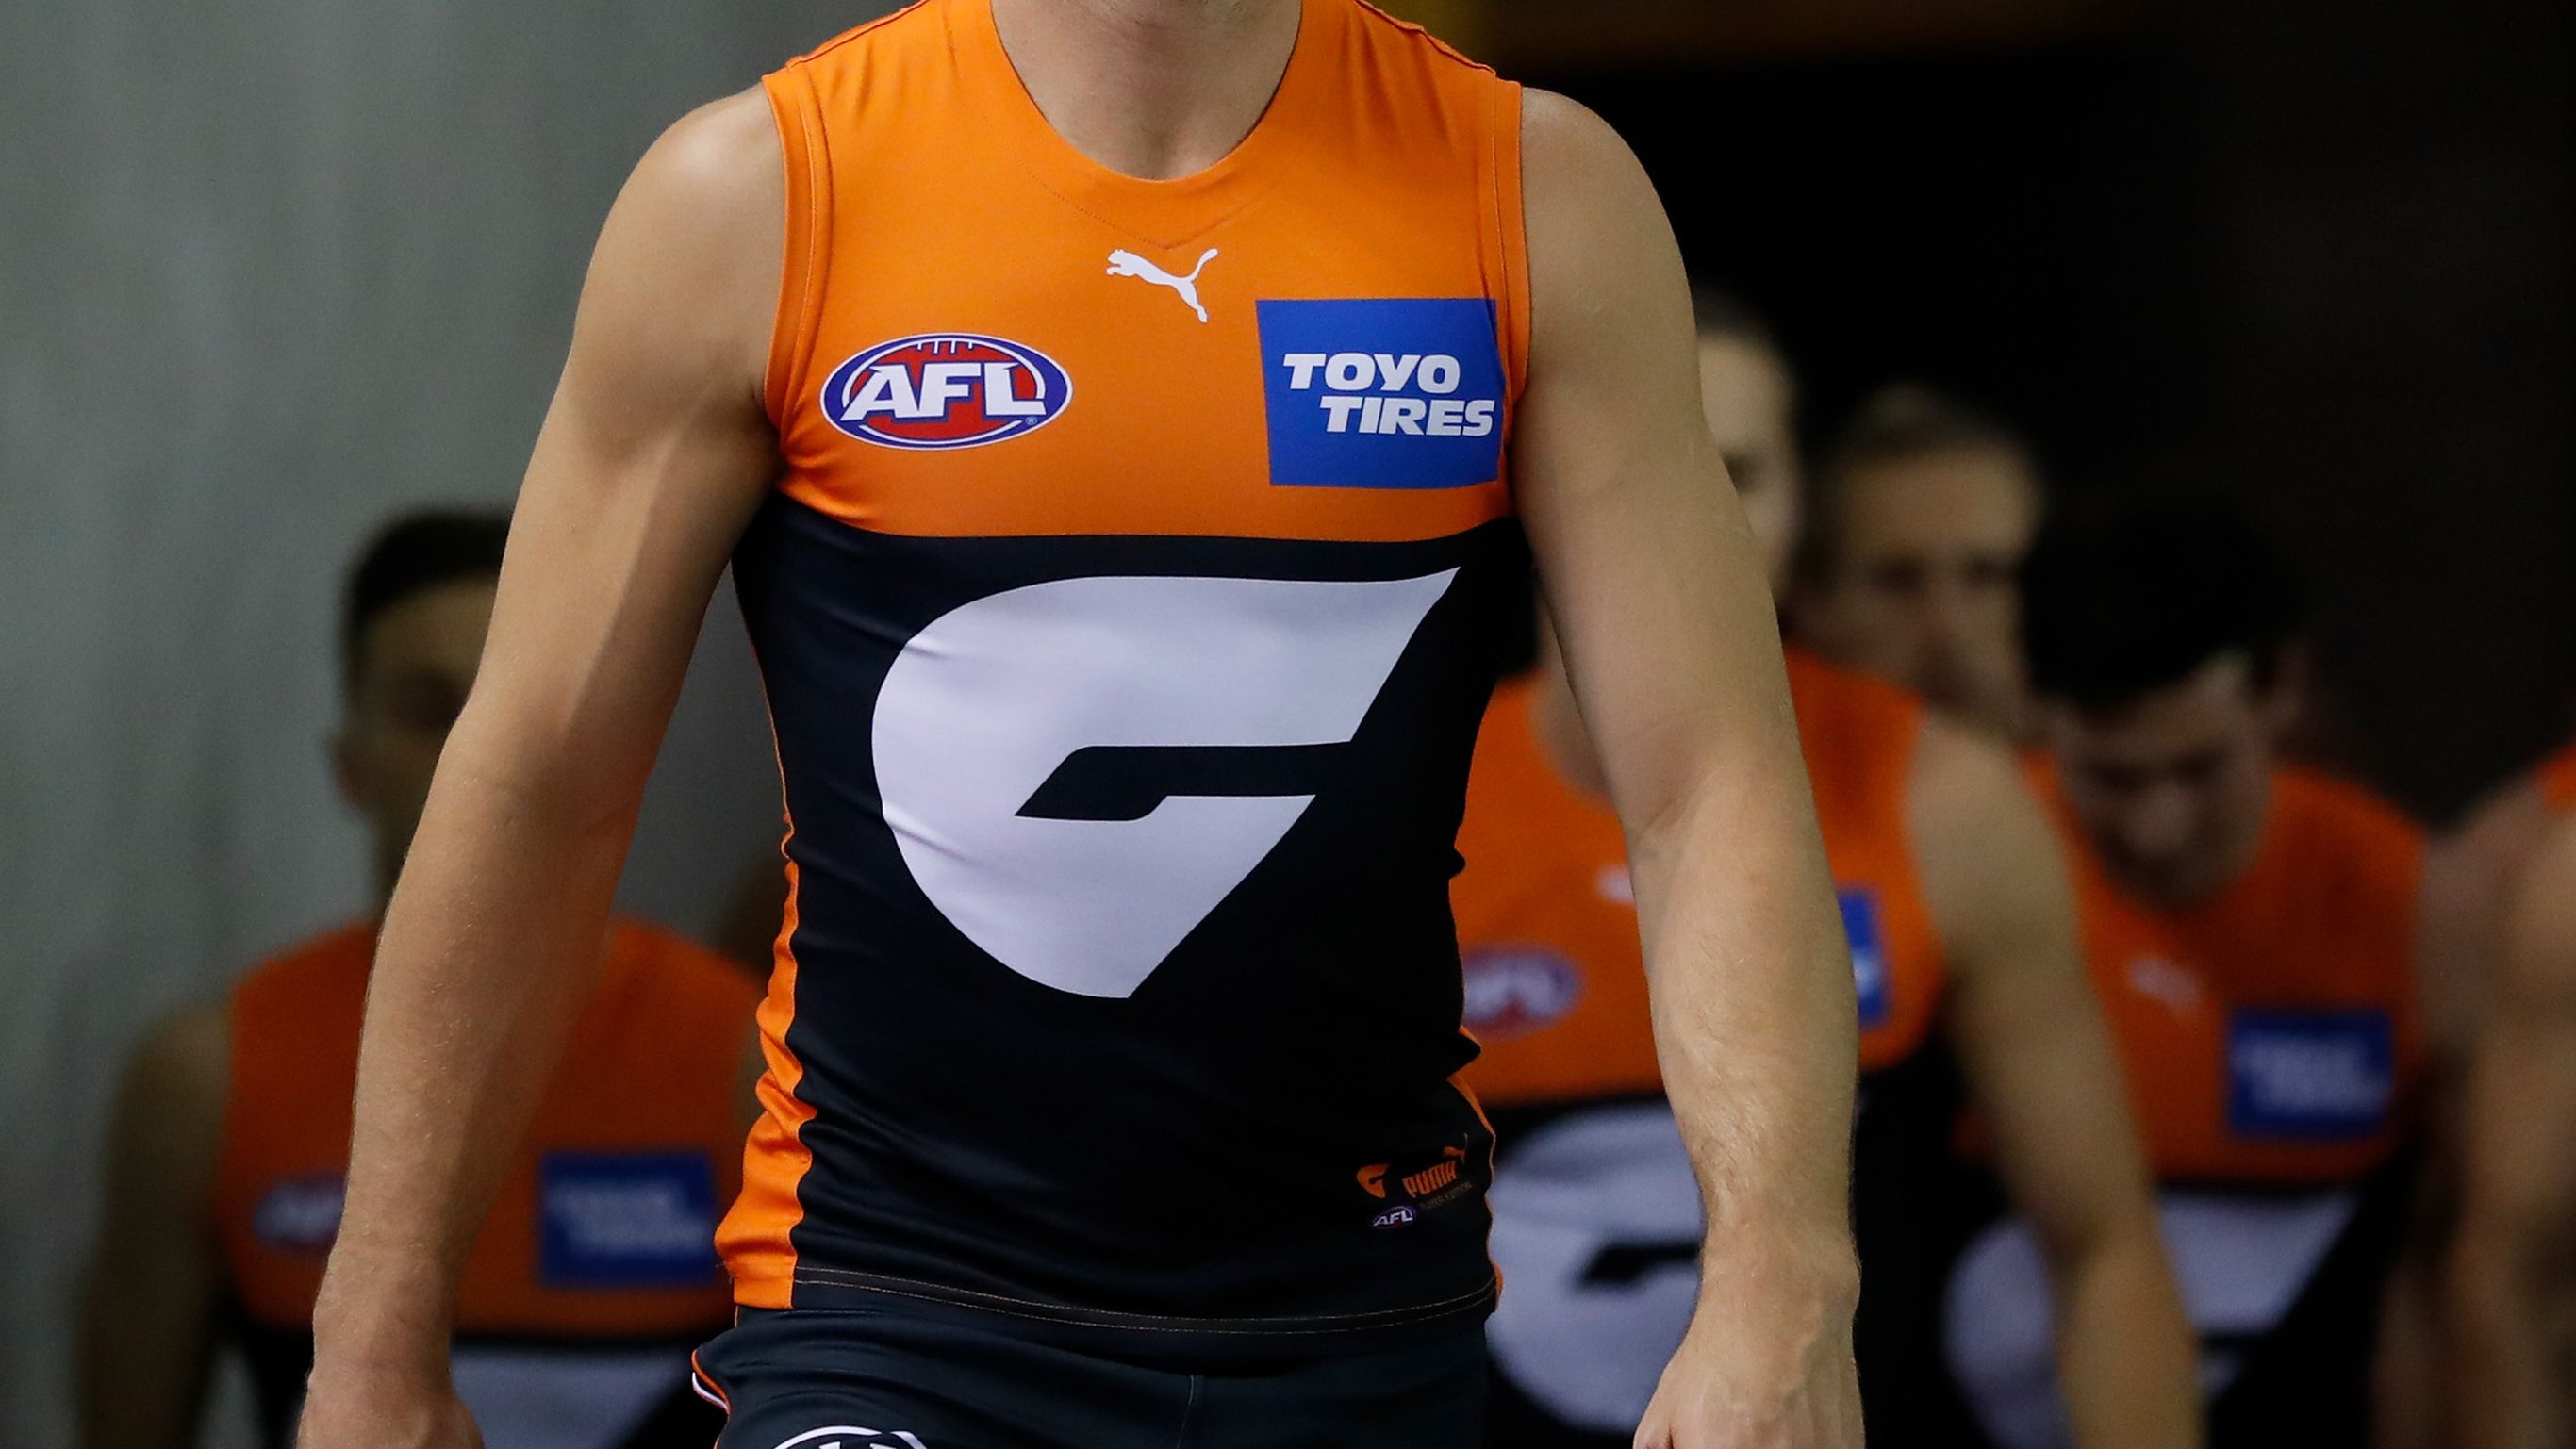 AFL hit with another COVID-19 case as GWS Giants player tests positive